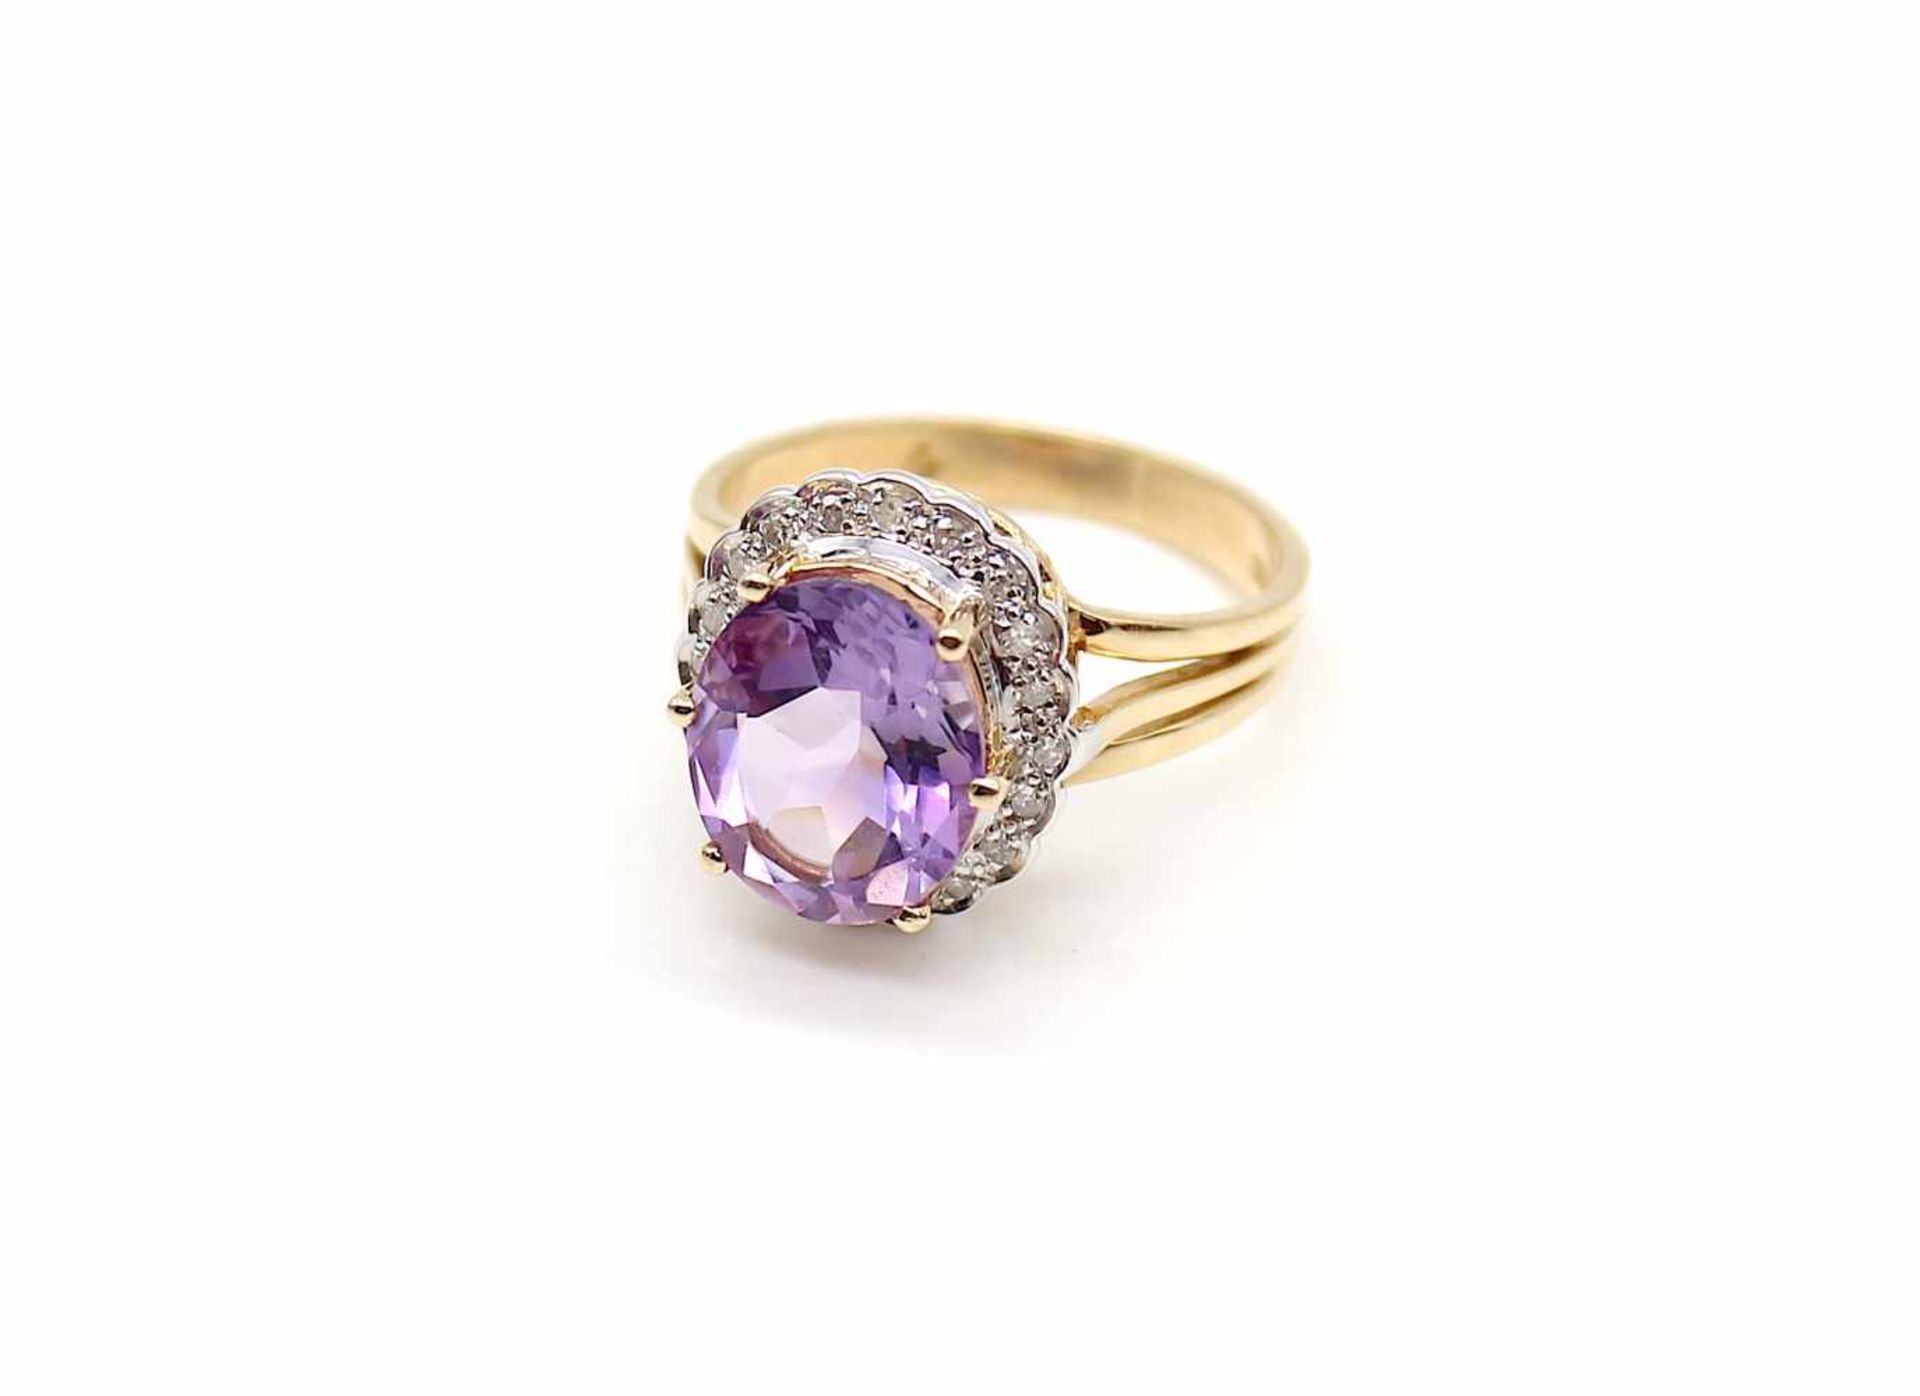 Ring of 585 gold with an amethyst and 20 diamonds, total approx. 0.15 ct.Weight 5.8 g, size 60- - -